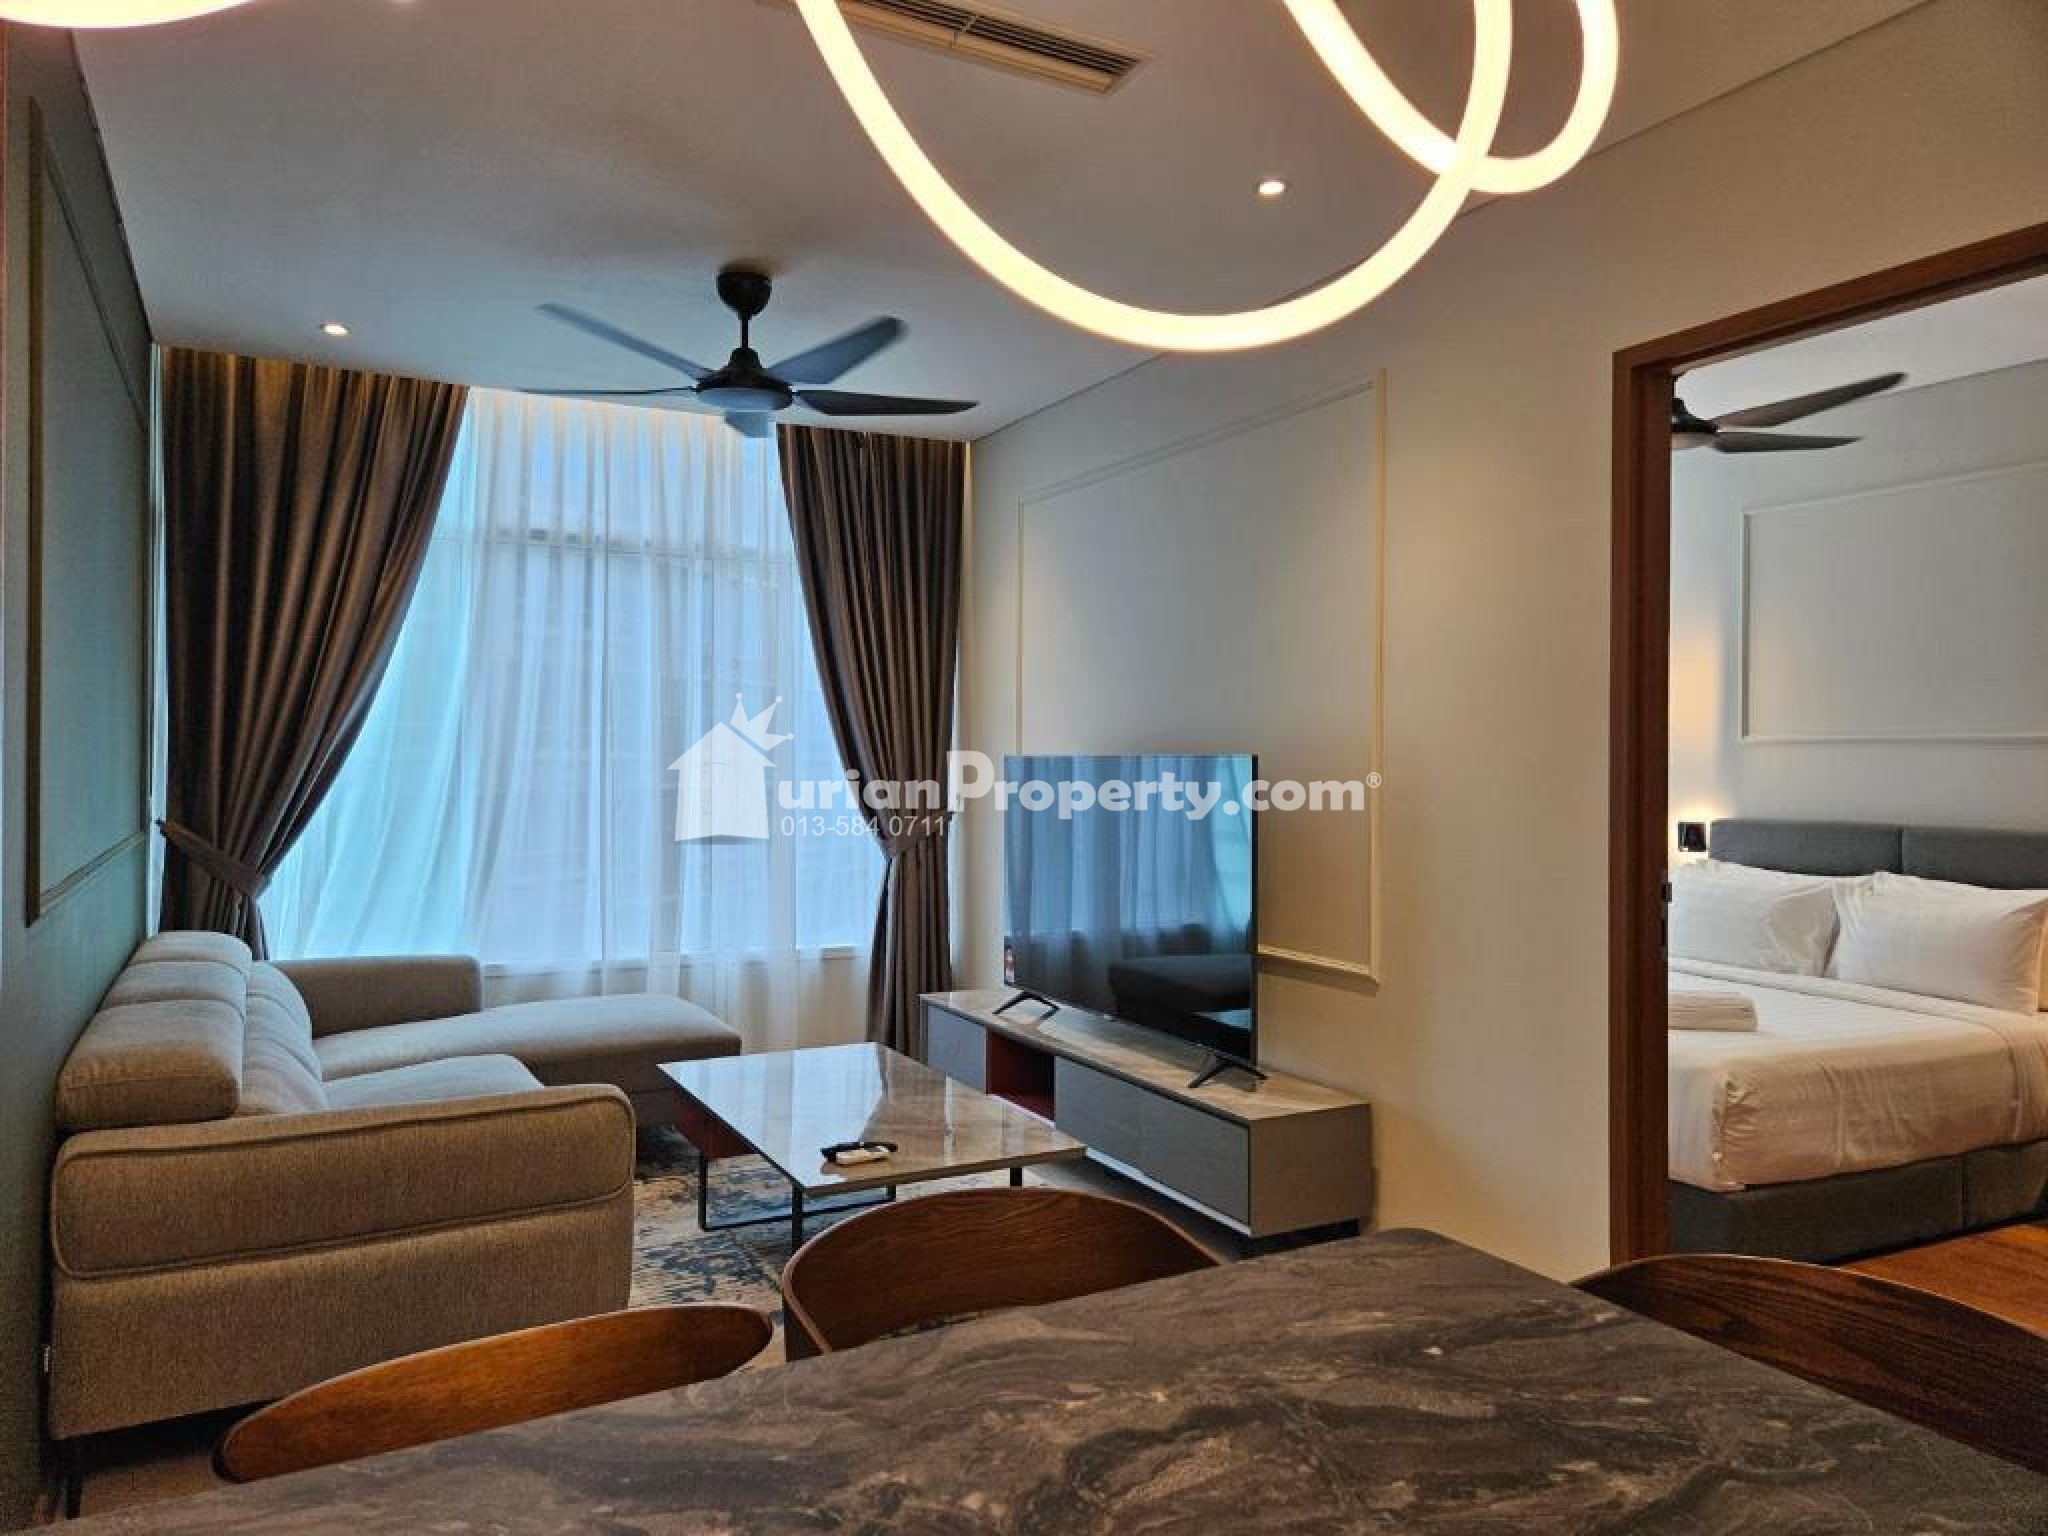 Condo For Rent at Sky Suites